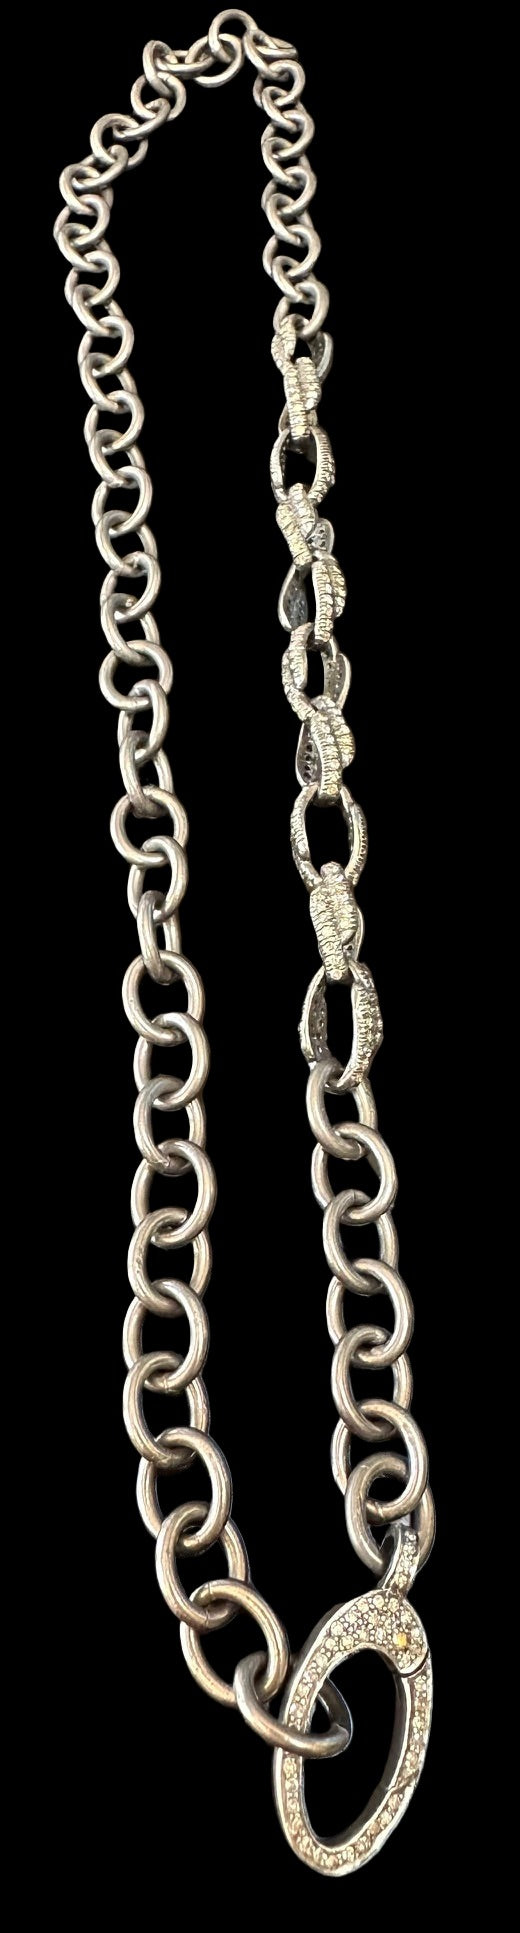 Diamond Links & Clasp Blackened Sterling Silver Necklace, 18"